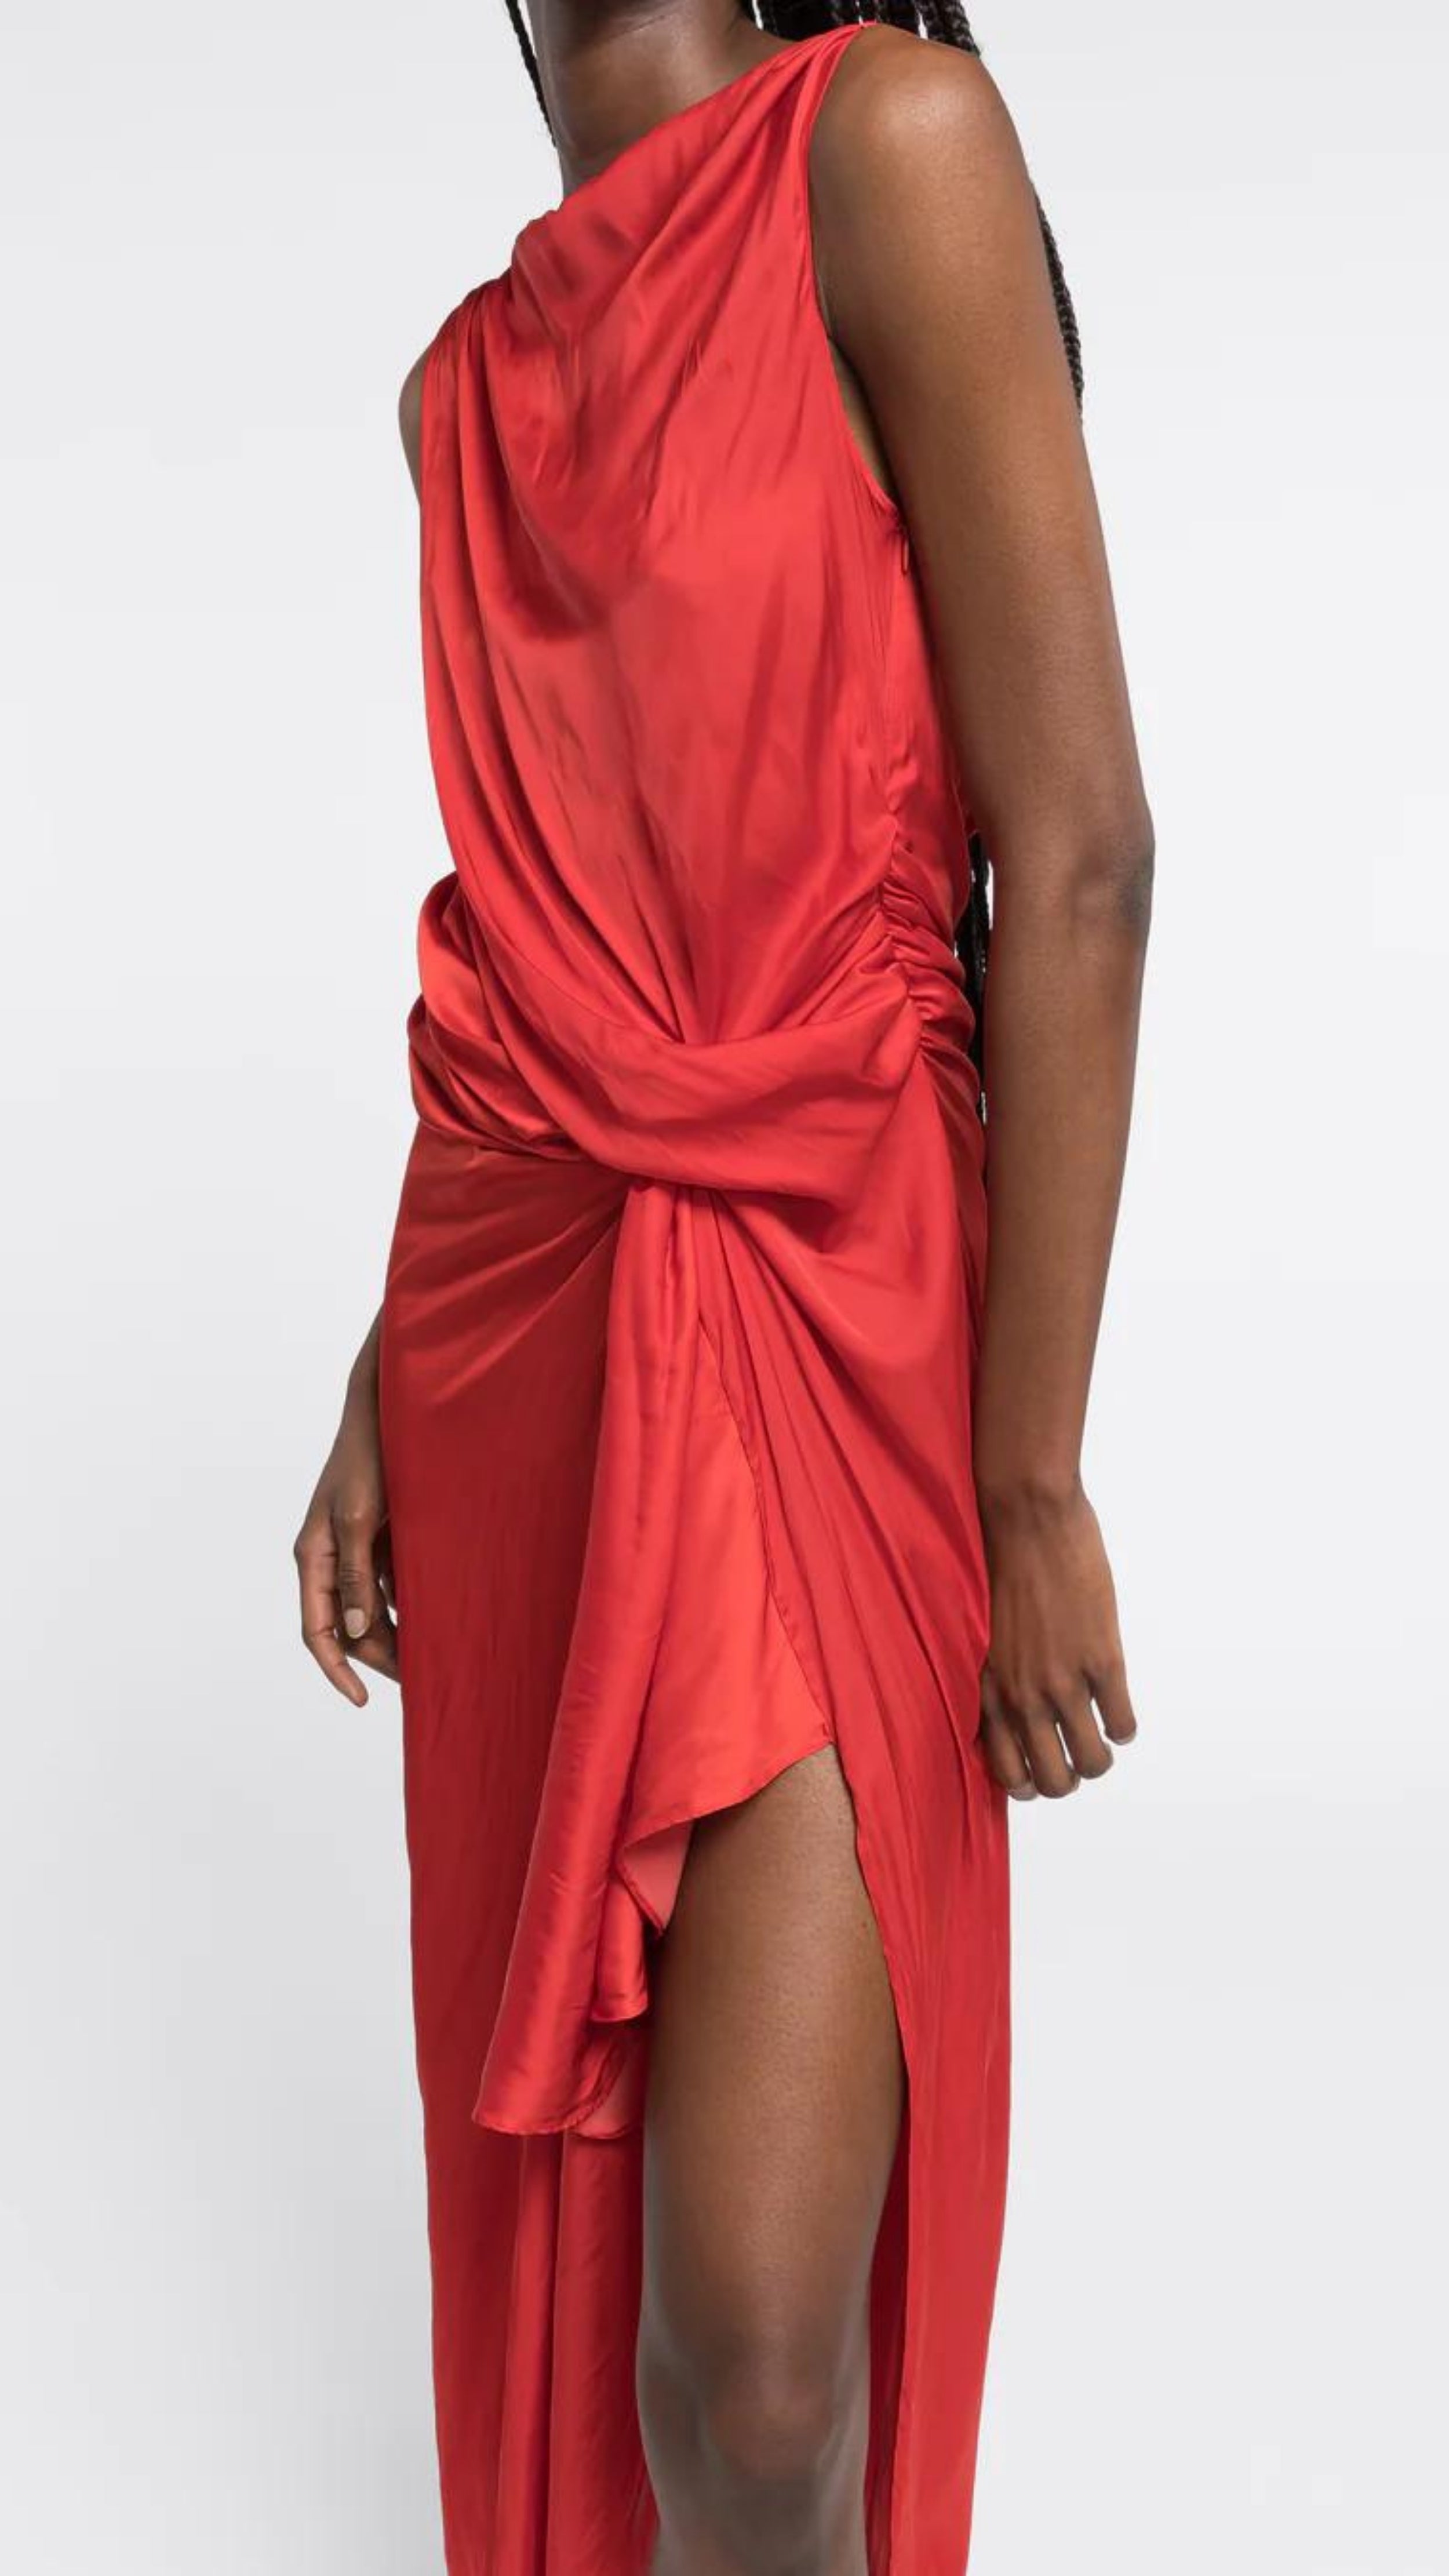 AZ Factory Colville Molly Molloy Lucinda Chambers, Sleeveless Draped Dress in Red An elegant red formal dress with a silhouette defined by a straight neckline and asymmetrical hemline. The waistline has detailed draping and the front leg as a slit. Shown on model with side draping detail